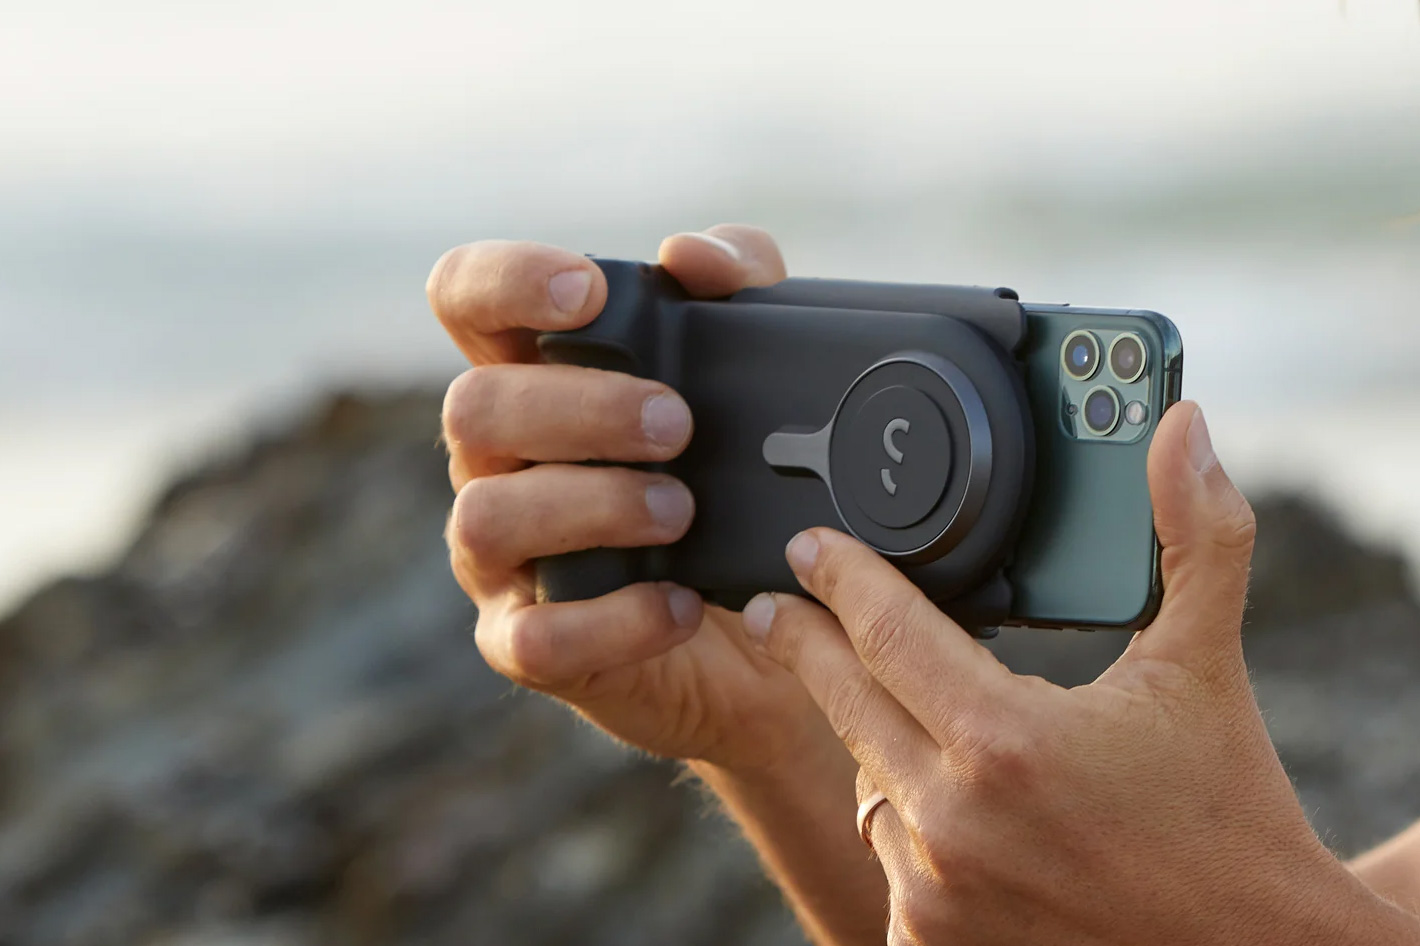 Need stability? Get a ShiftCam ProGrip for your smartphone